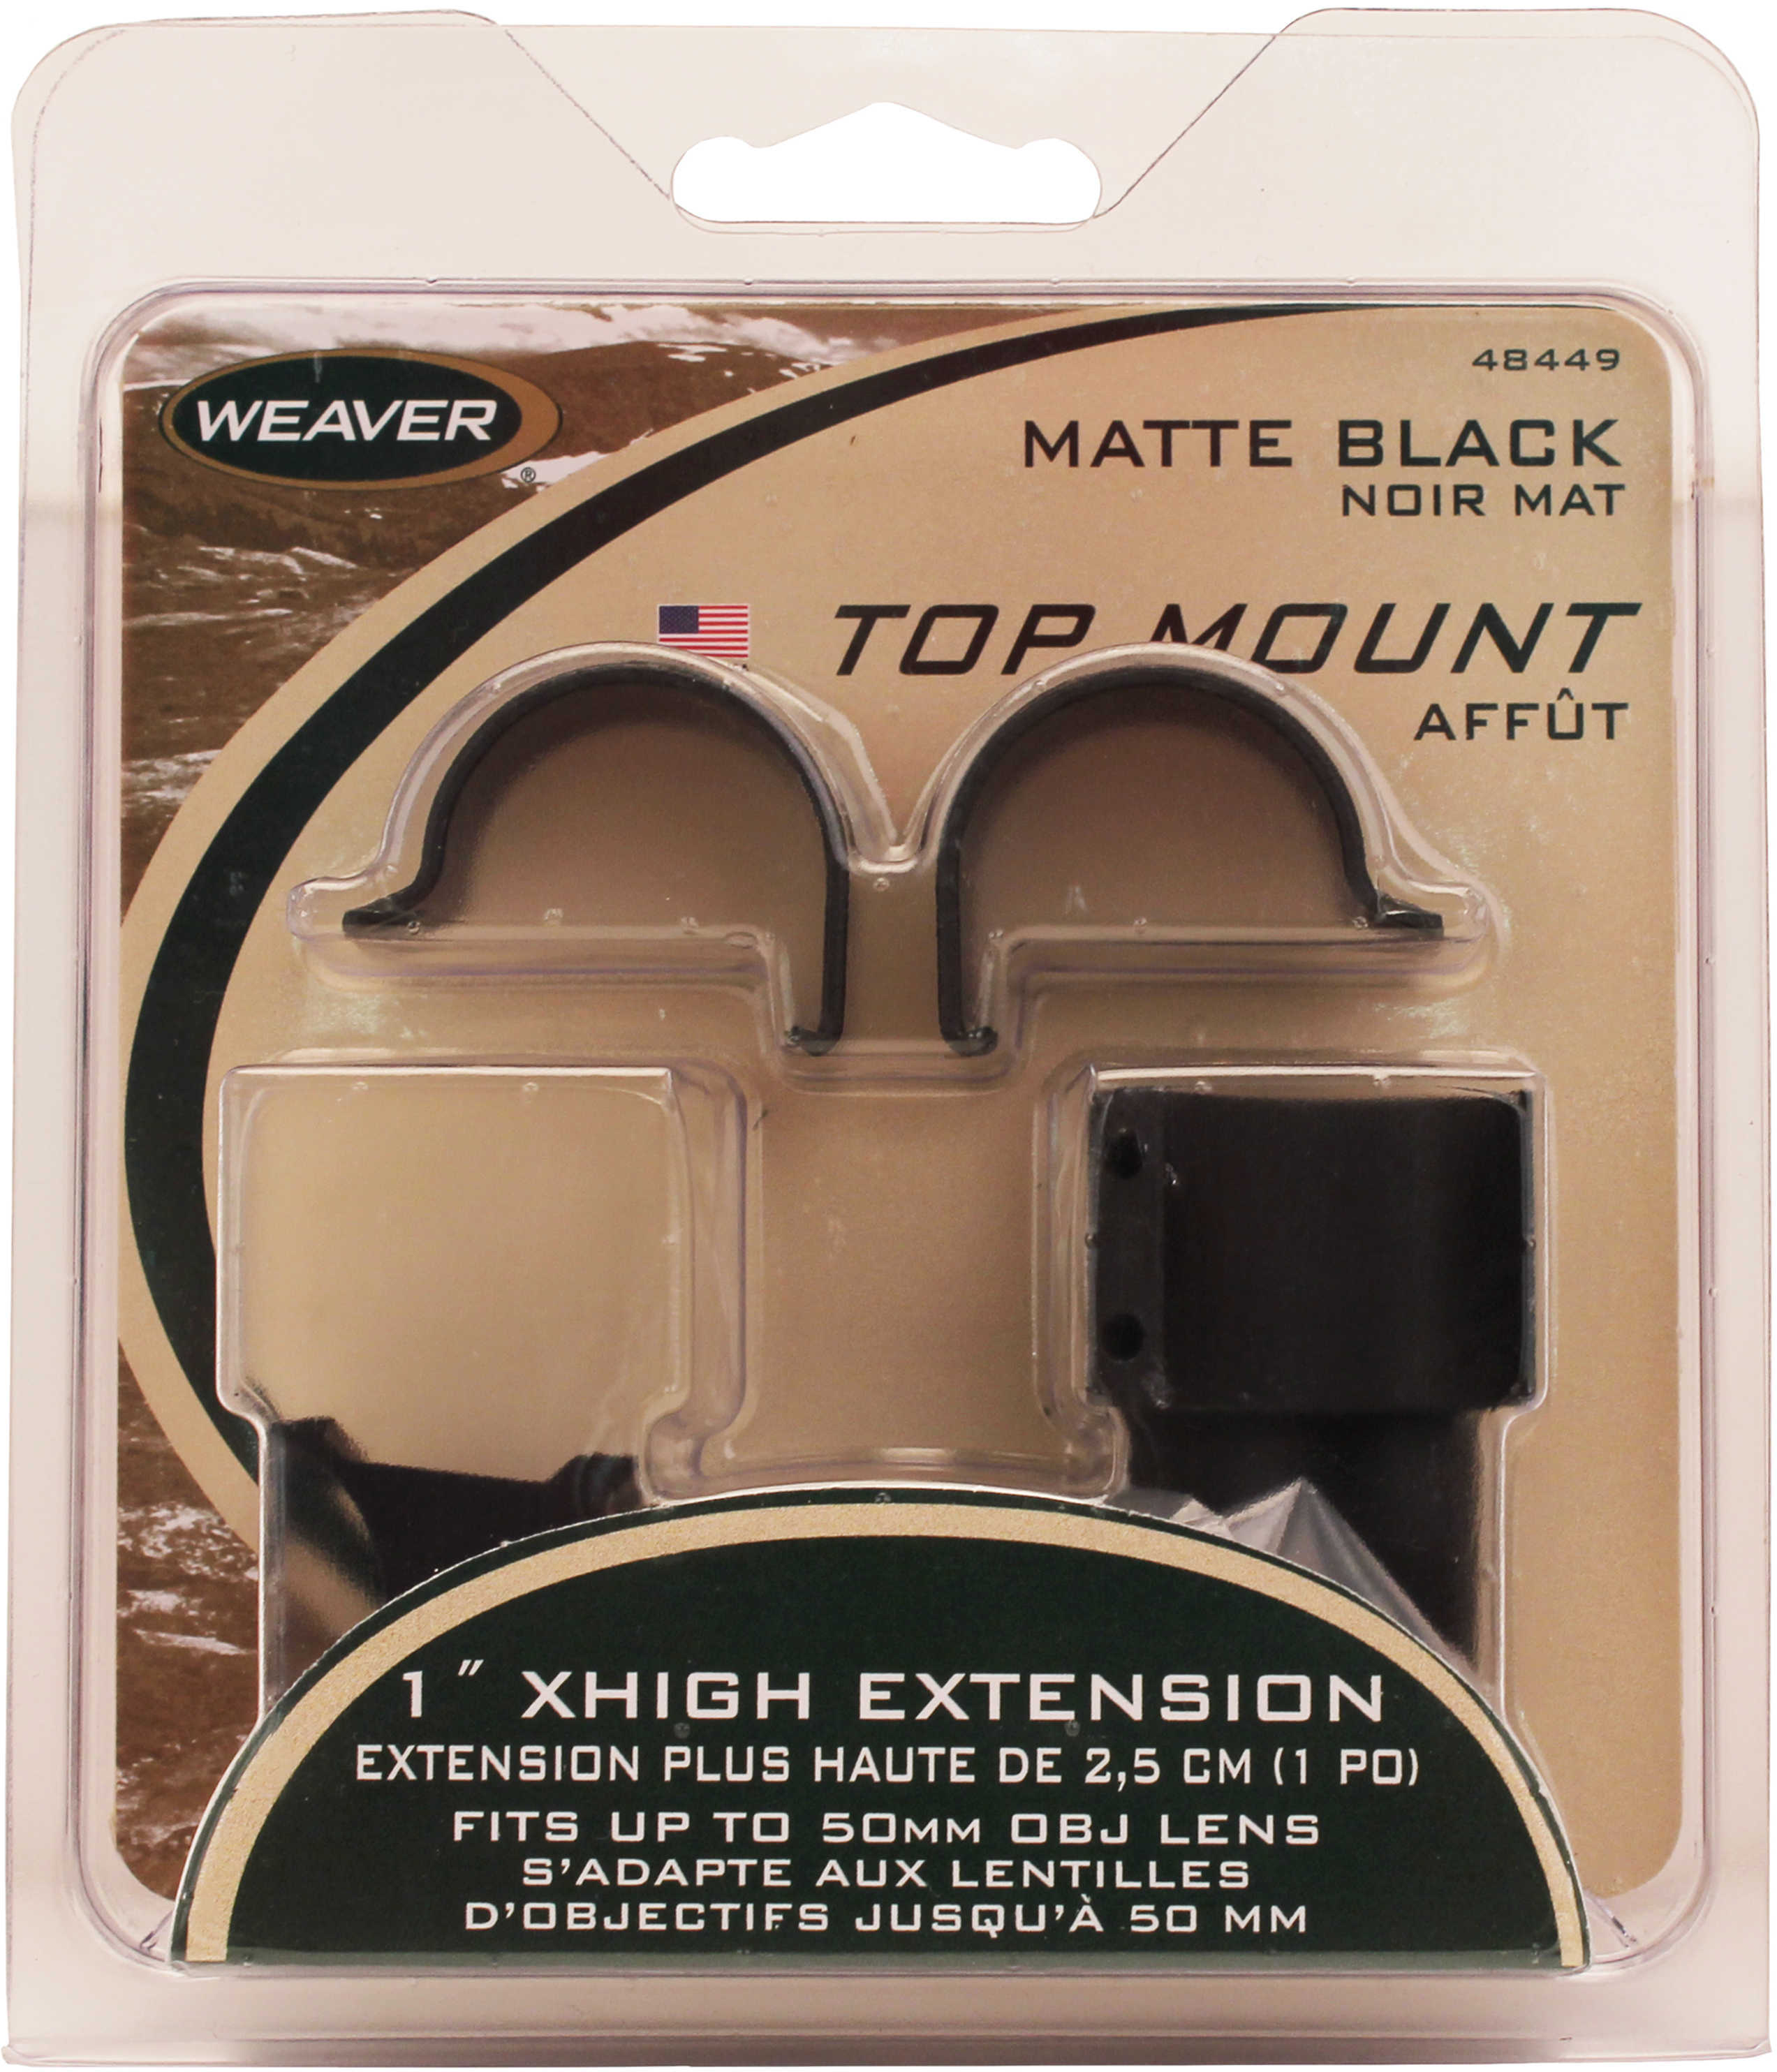 Simmons Weaver 1" Extra High Extension Rings With Matte Black Finish Md: 48449